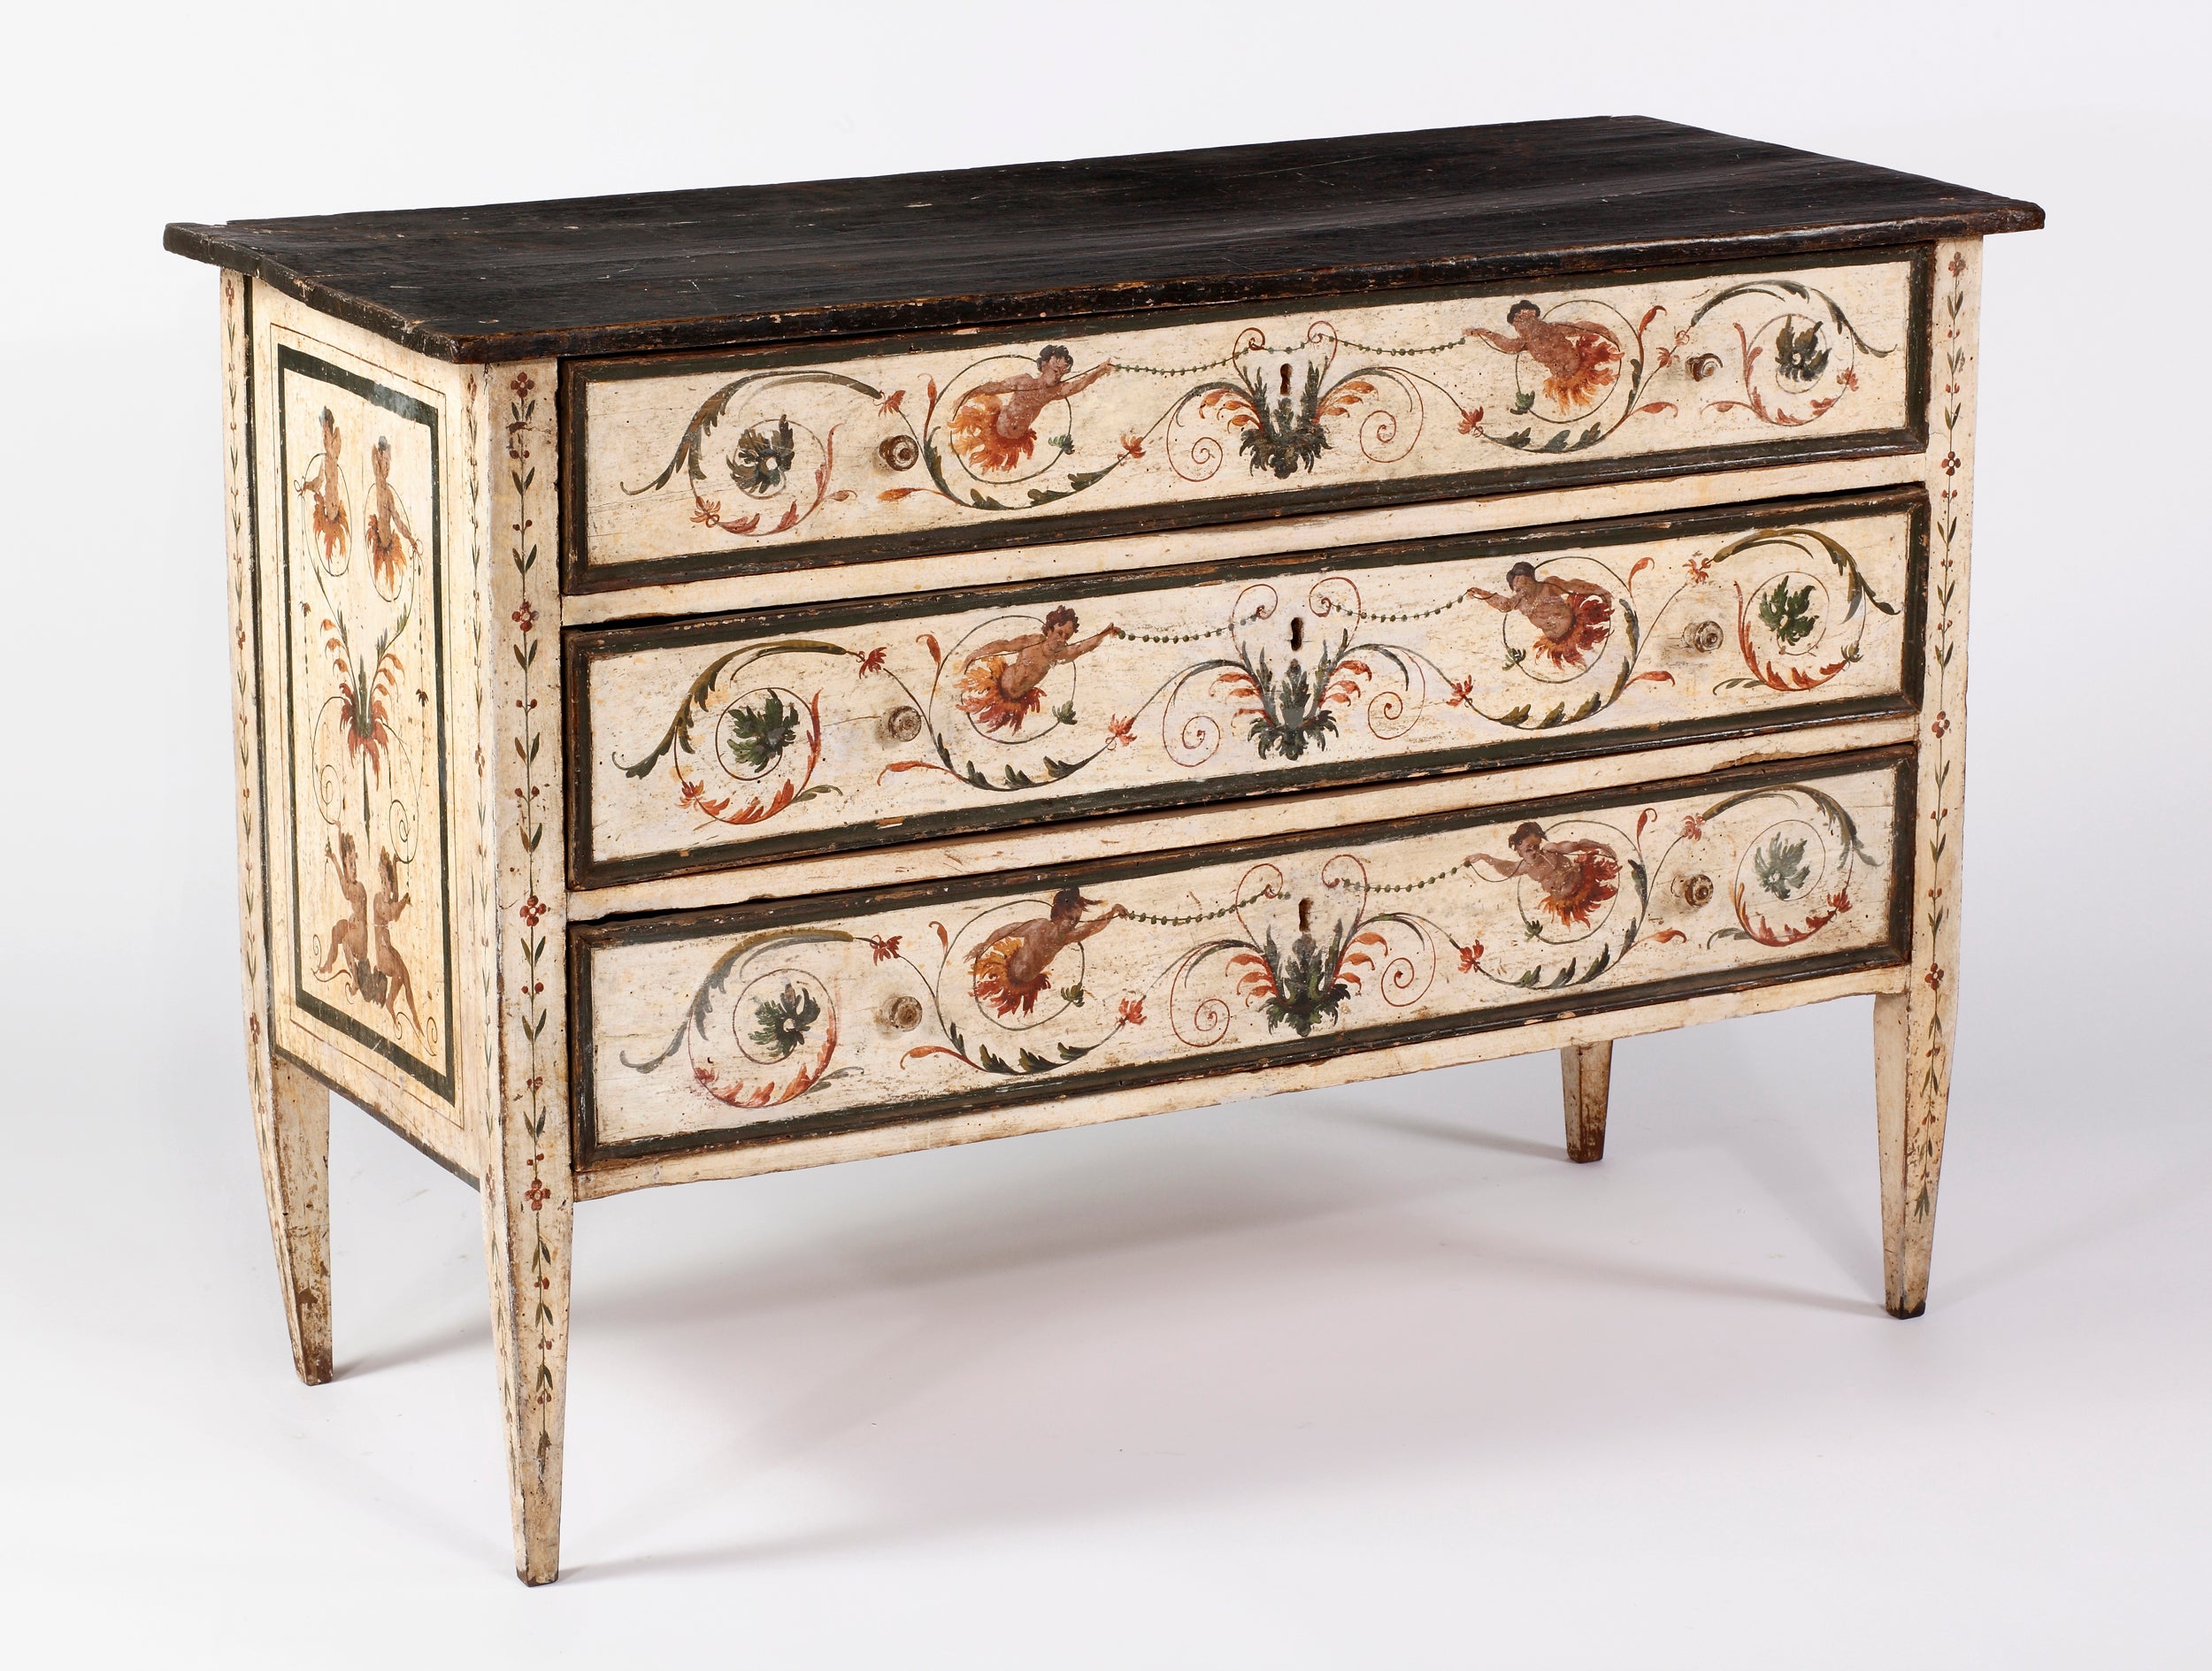 An Italian Polychrome-Painted & Faux-Marble Top Neoclassic Commode, 18th Century For Sale